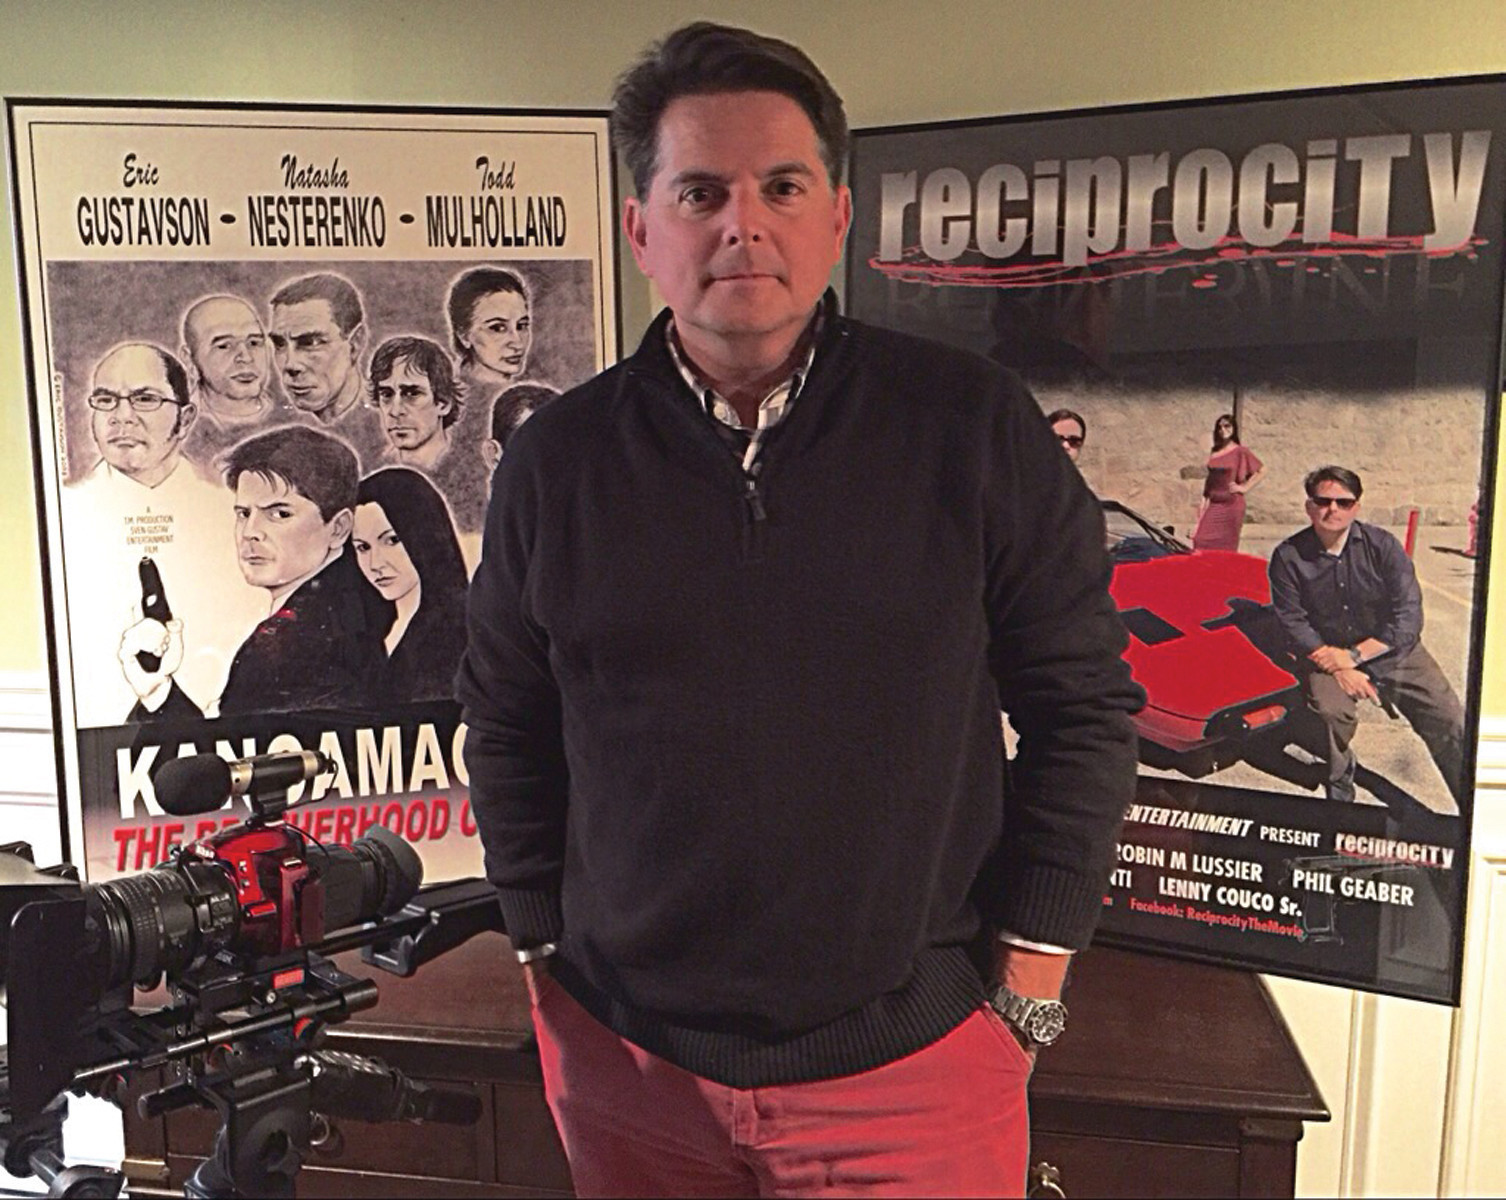 GRASSROOTS FILMMAKER: Todd Mulholland has been following his passion, making movies, for 20 years. Seen here with his camera, and flanked by the movie posters from his last two movies, Mulholland and his family are looking ahead to the filming of his next movie, a suspense thriller.